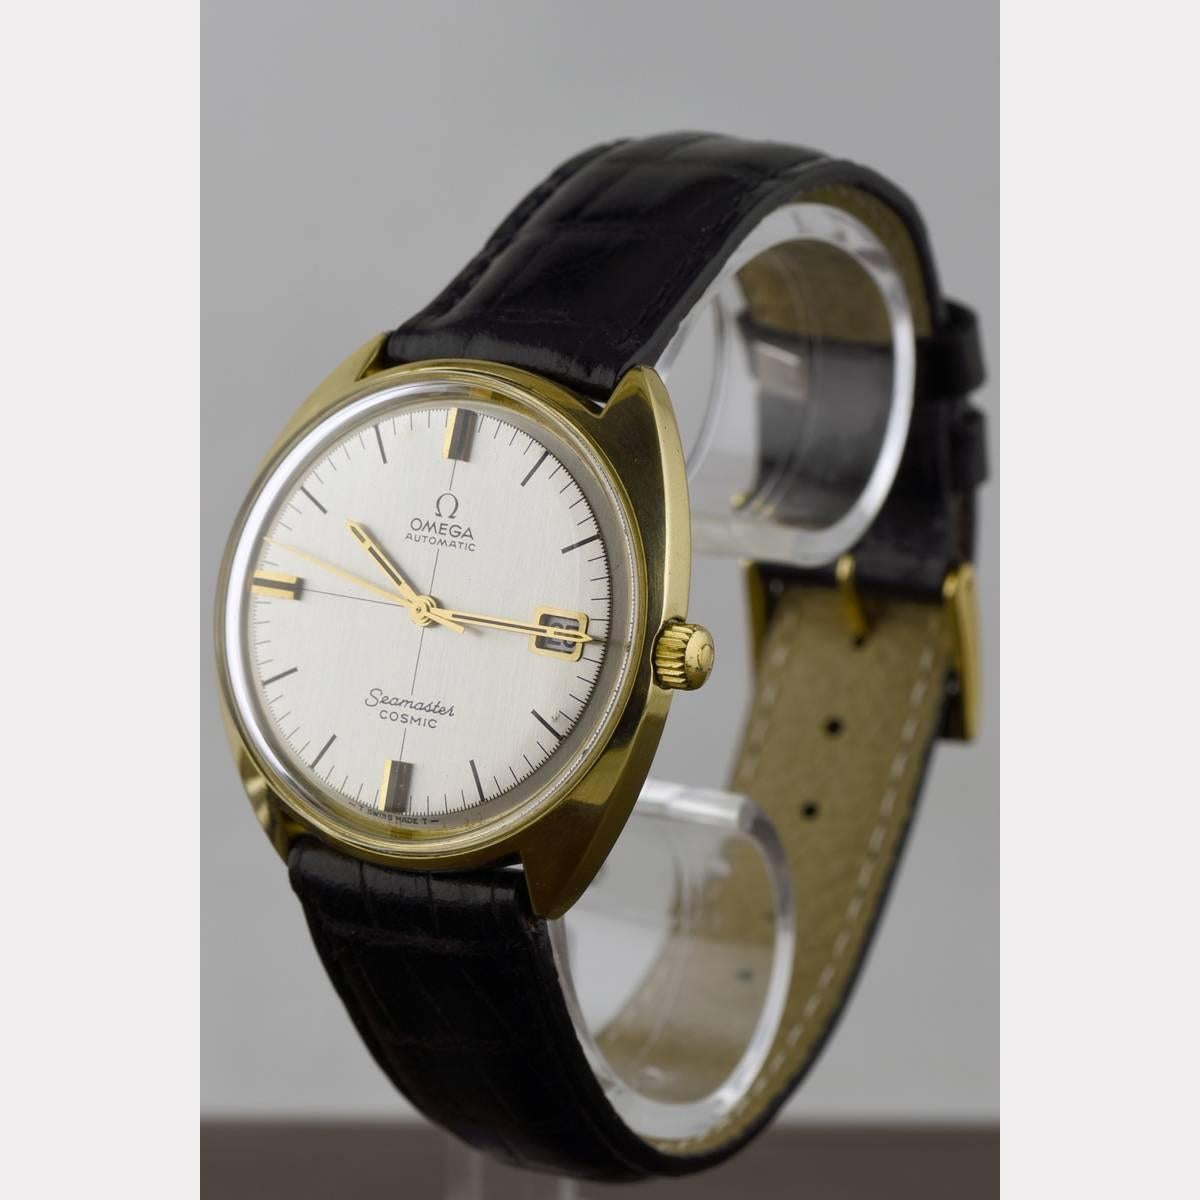 In the early 1970s Omega produced in high price segment this Seamasters with COSMIC Monocoque case. The case could be opened only with special tools, thus the movement was well protected against dust and moisture. By the well-known quality of its